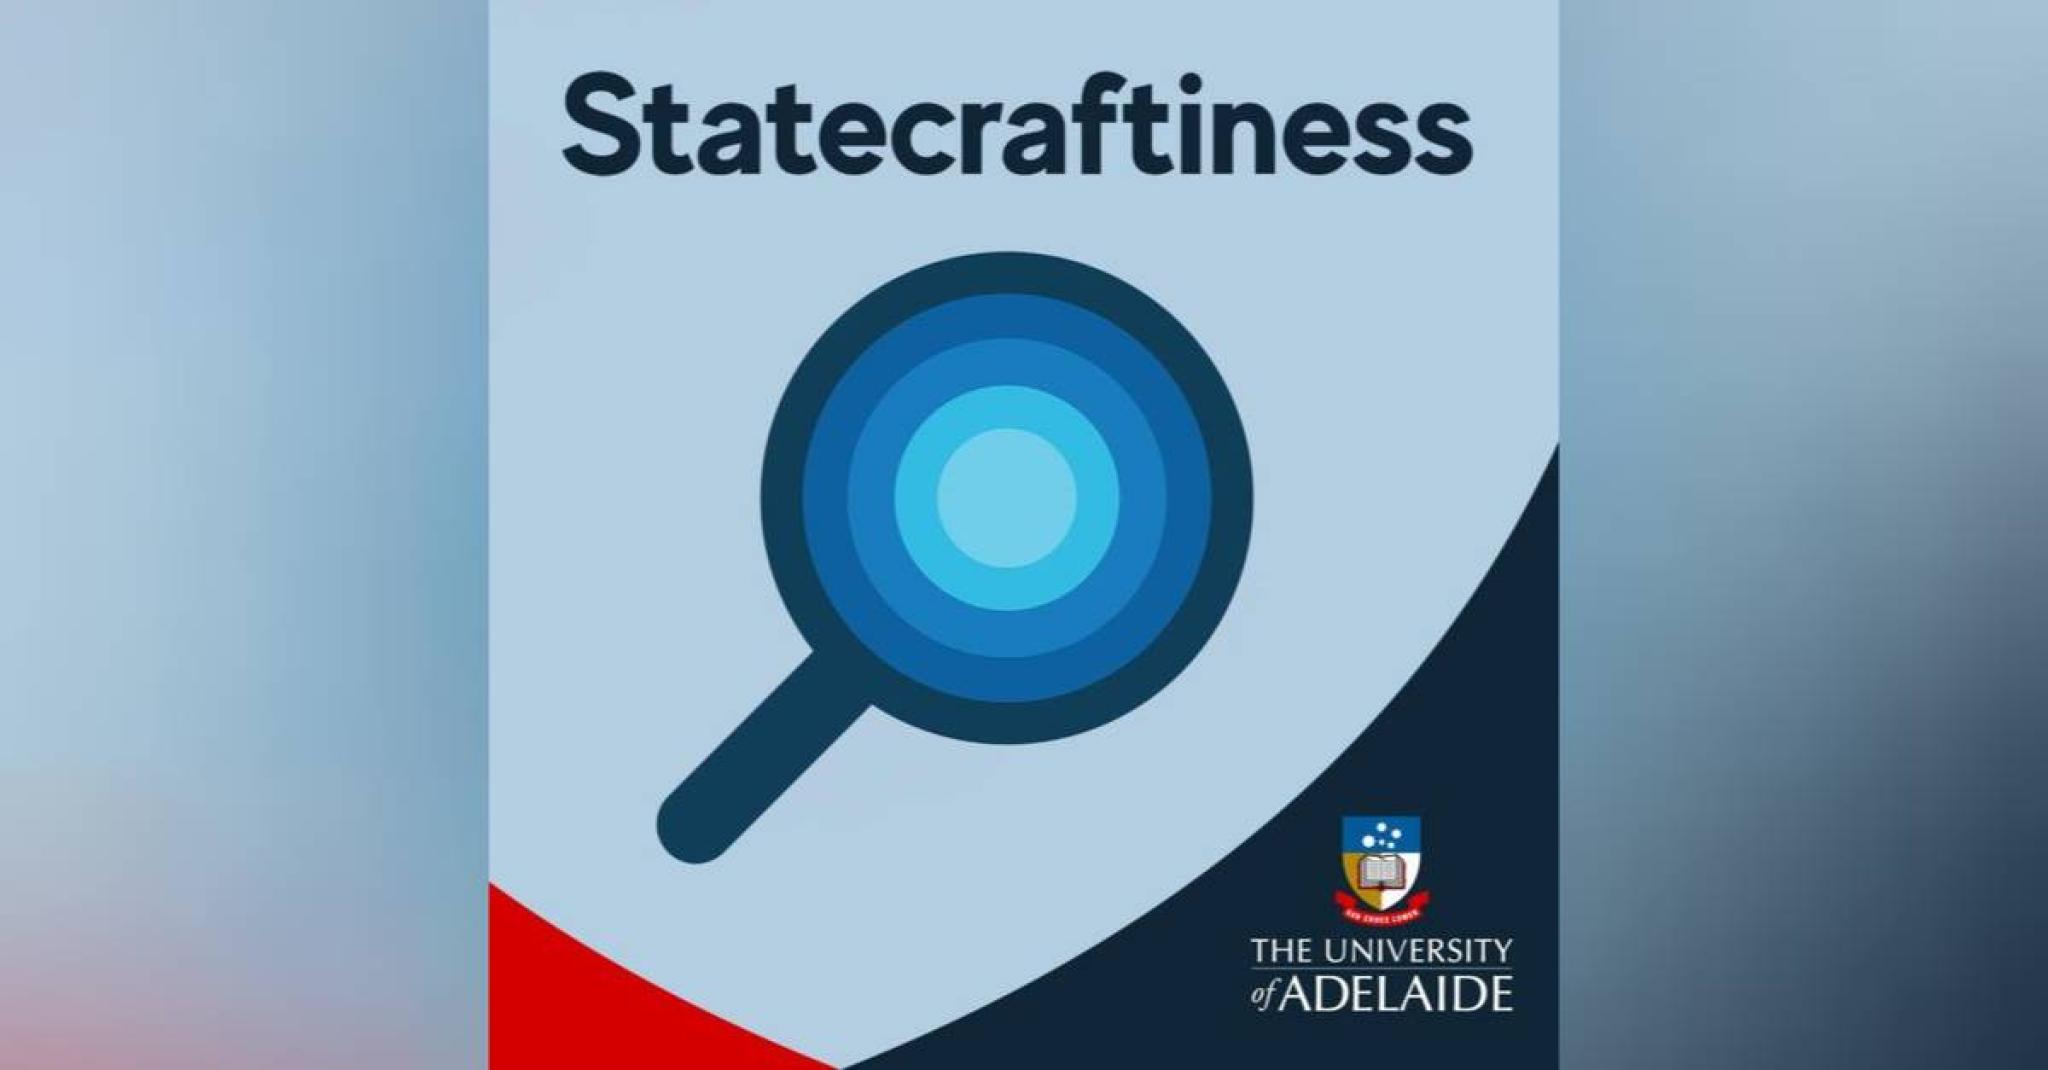 Statecraftiness - Investigating Influence in the Pacific